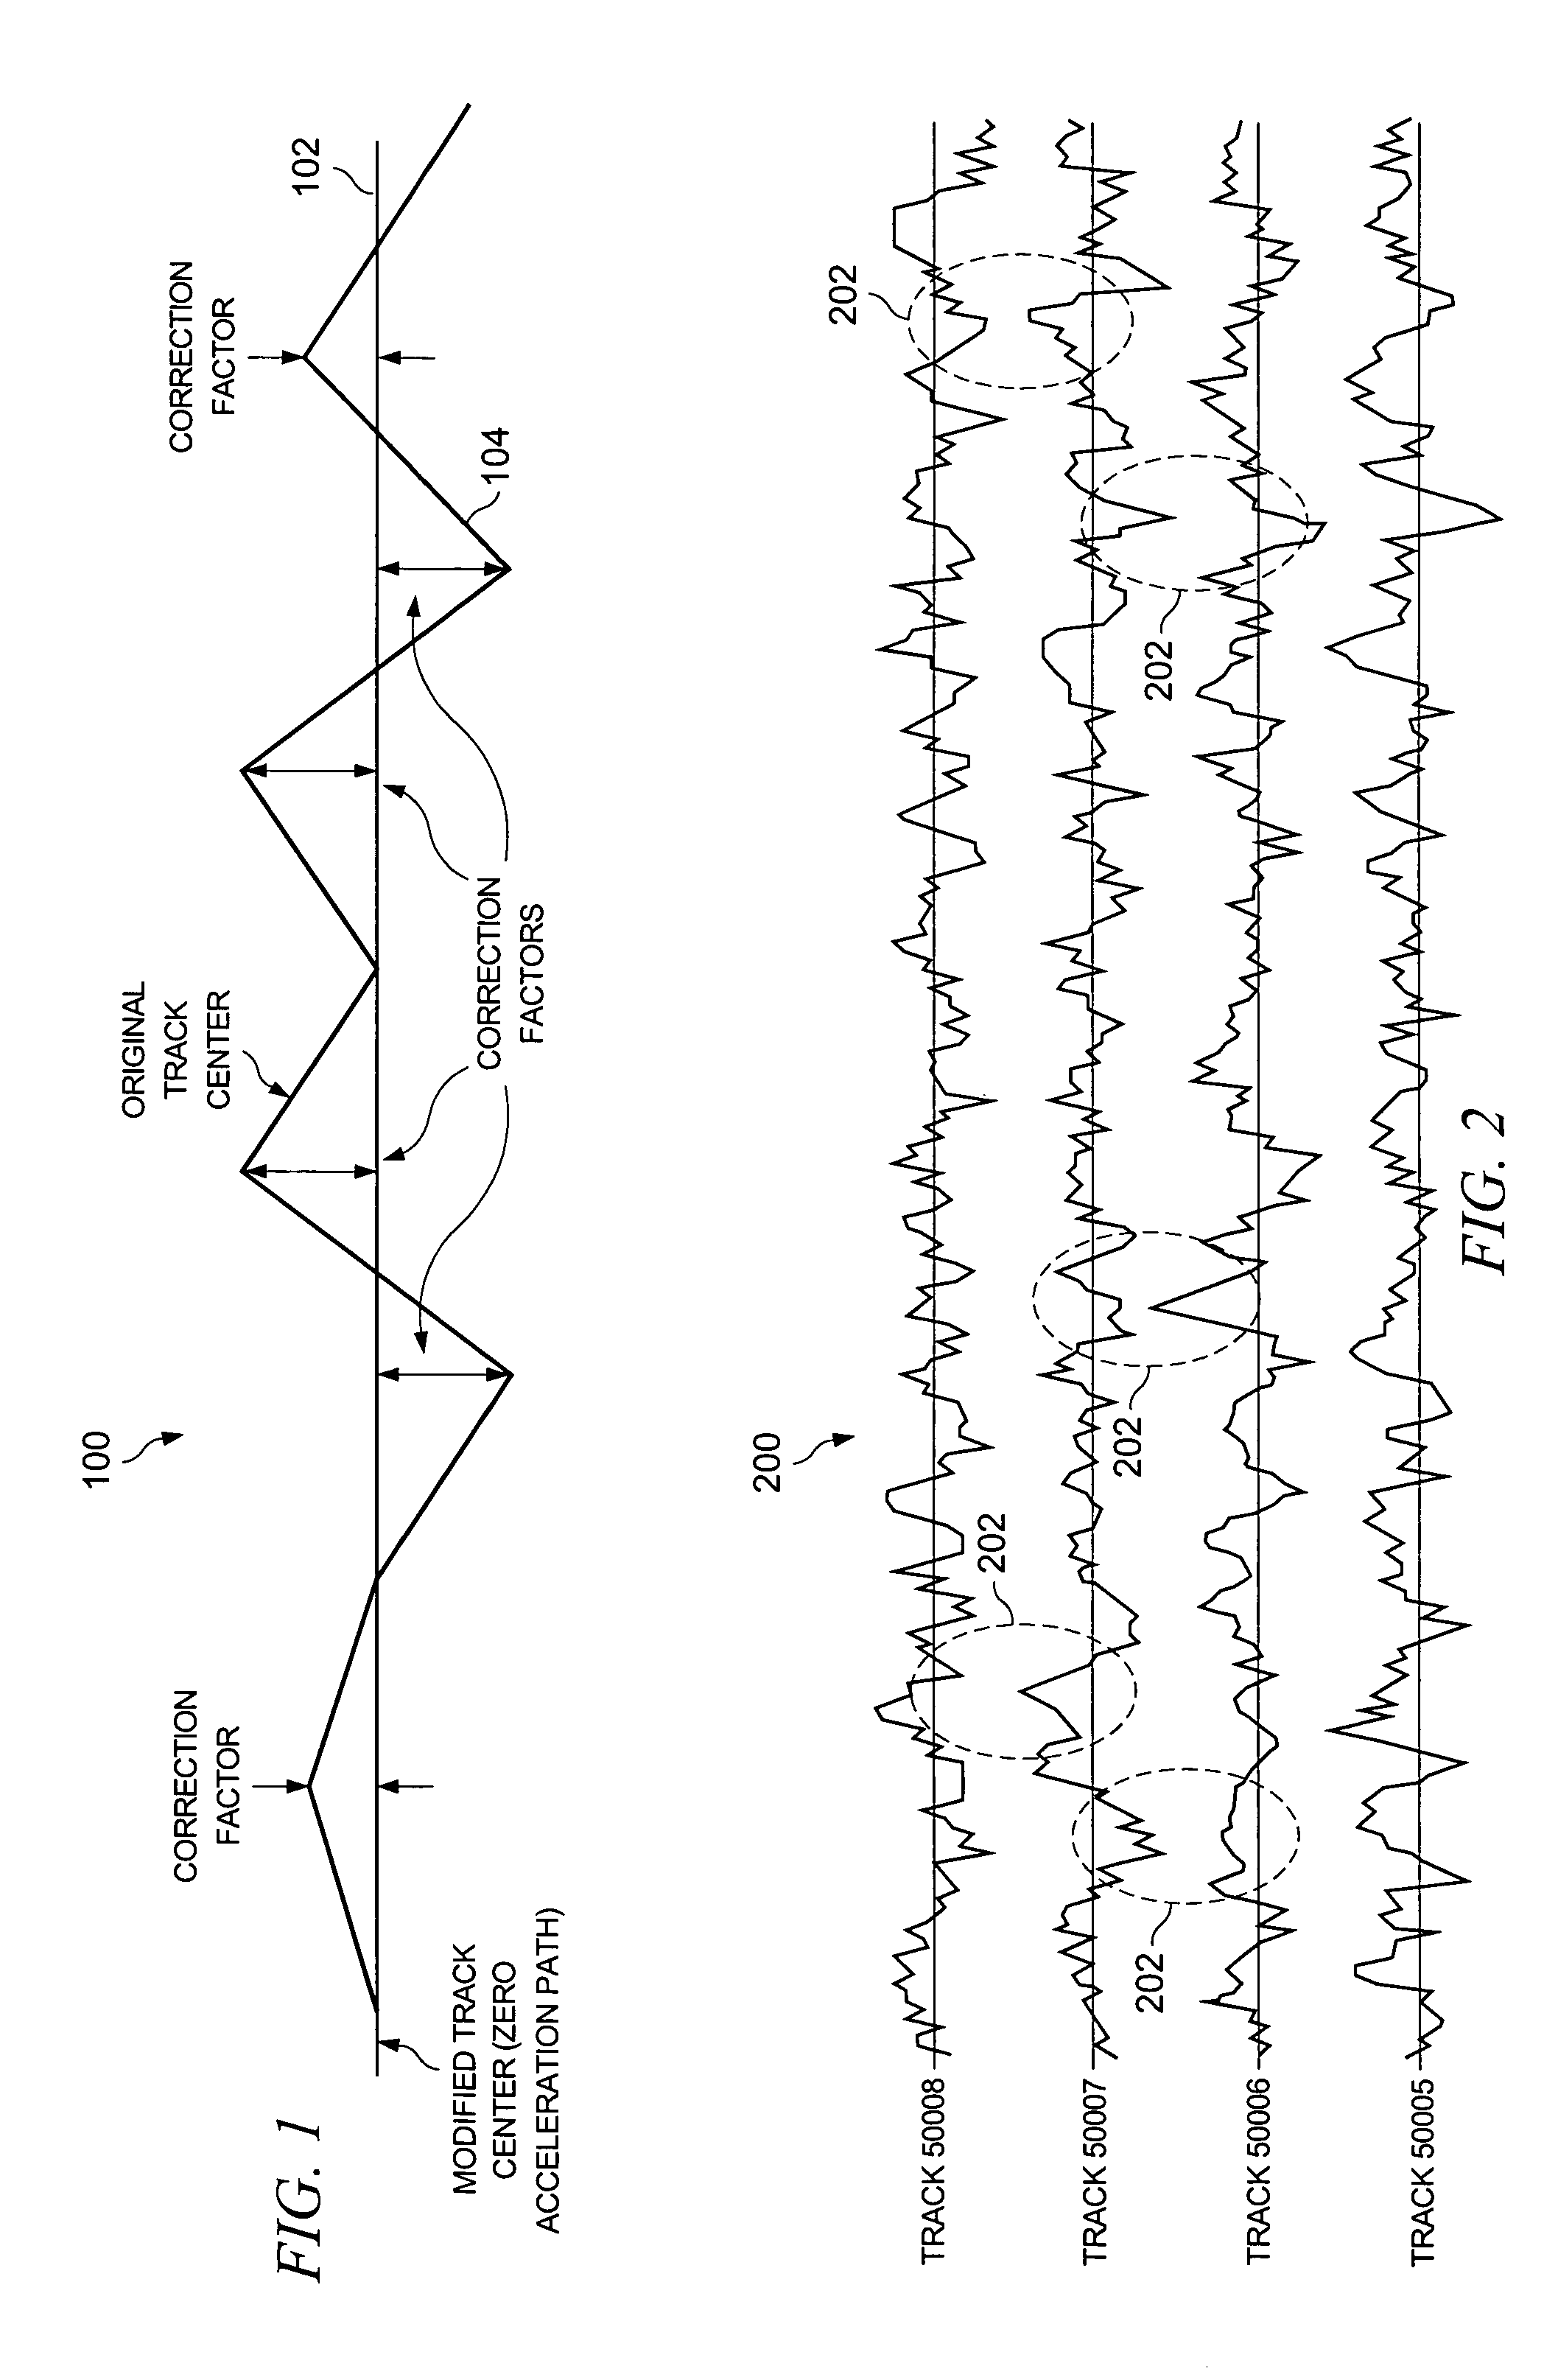 System and method for reducing ZAP time and track squeeze in a data storage device